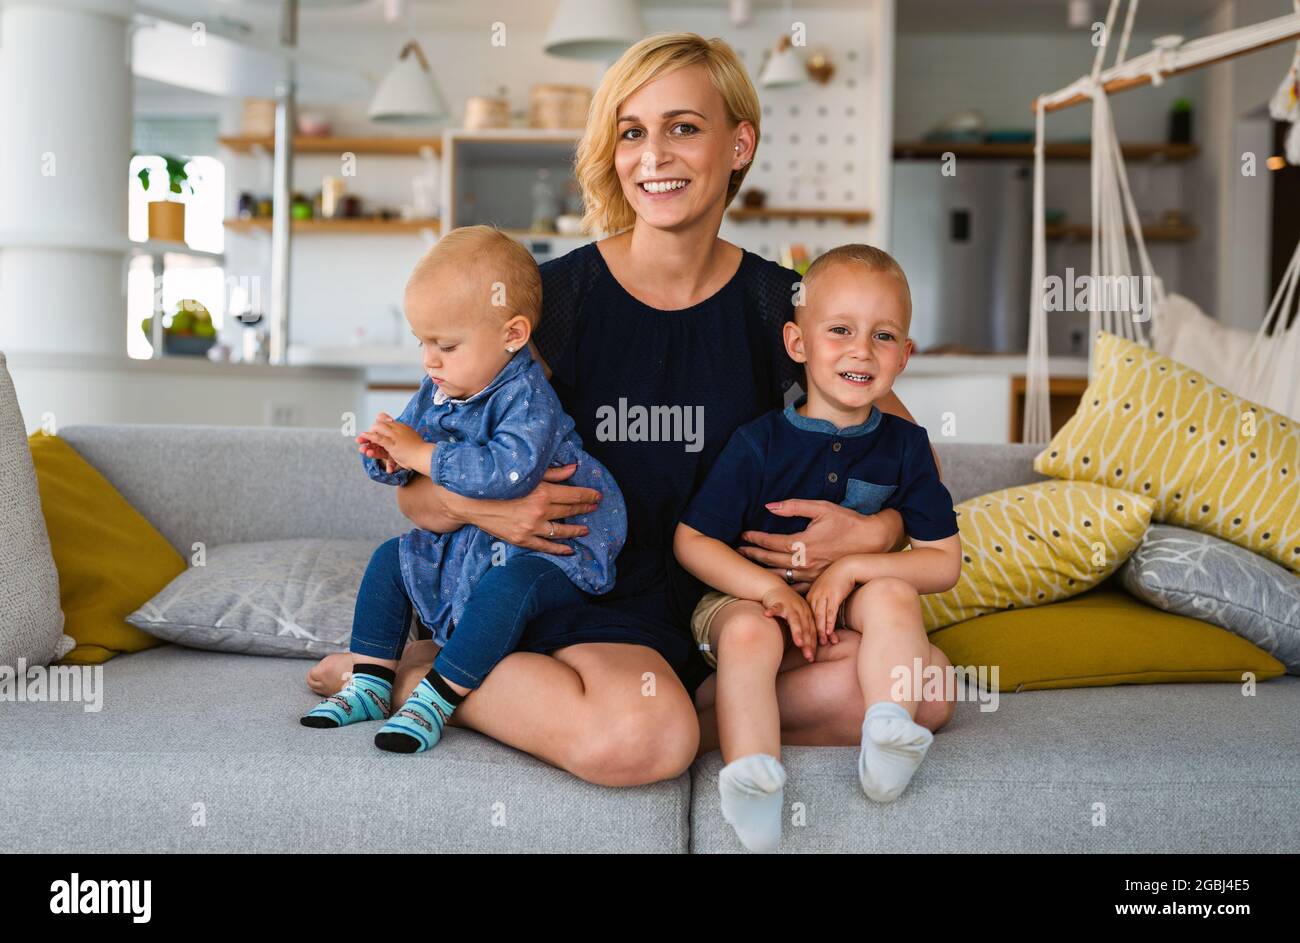 Young mother with two children having fun and love. Stock Photo